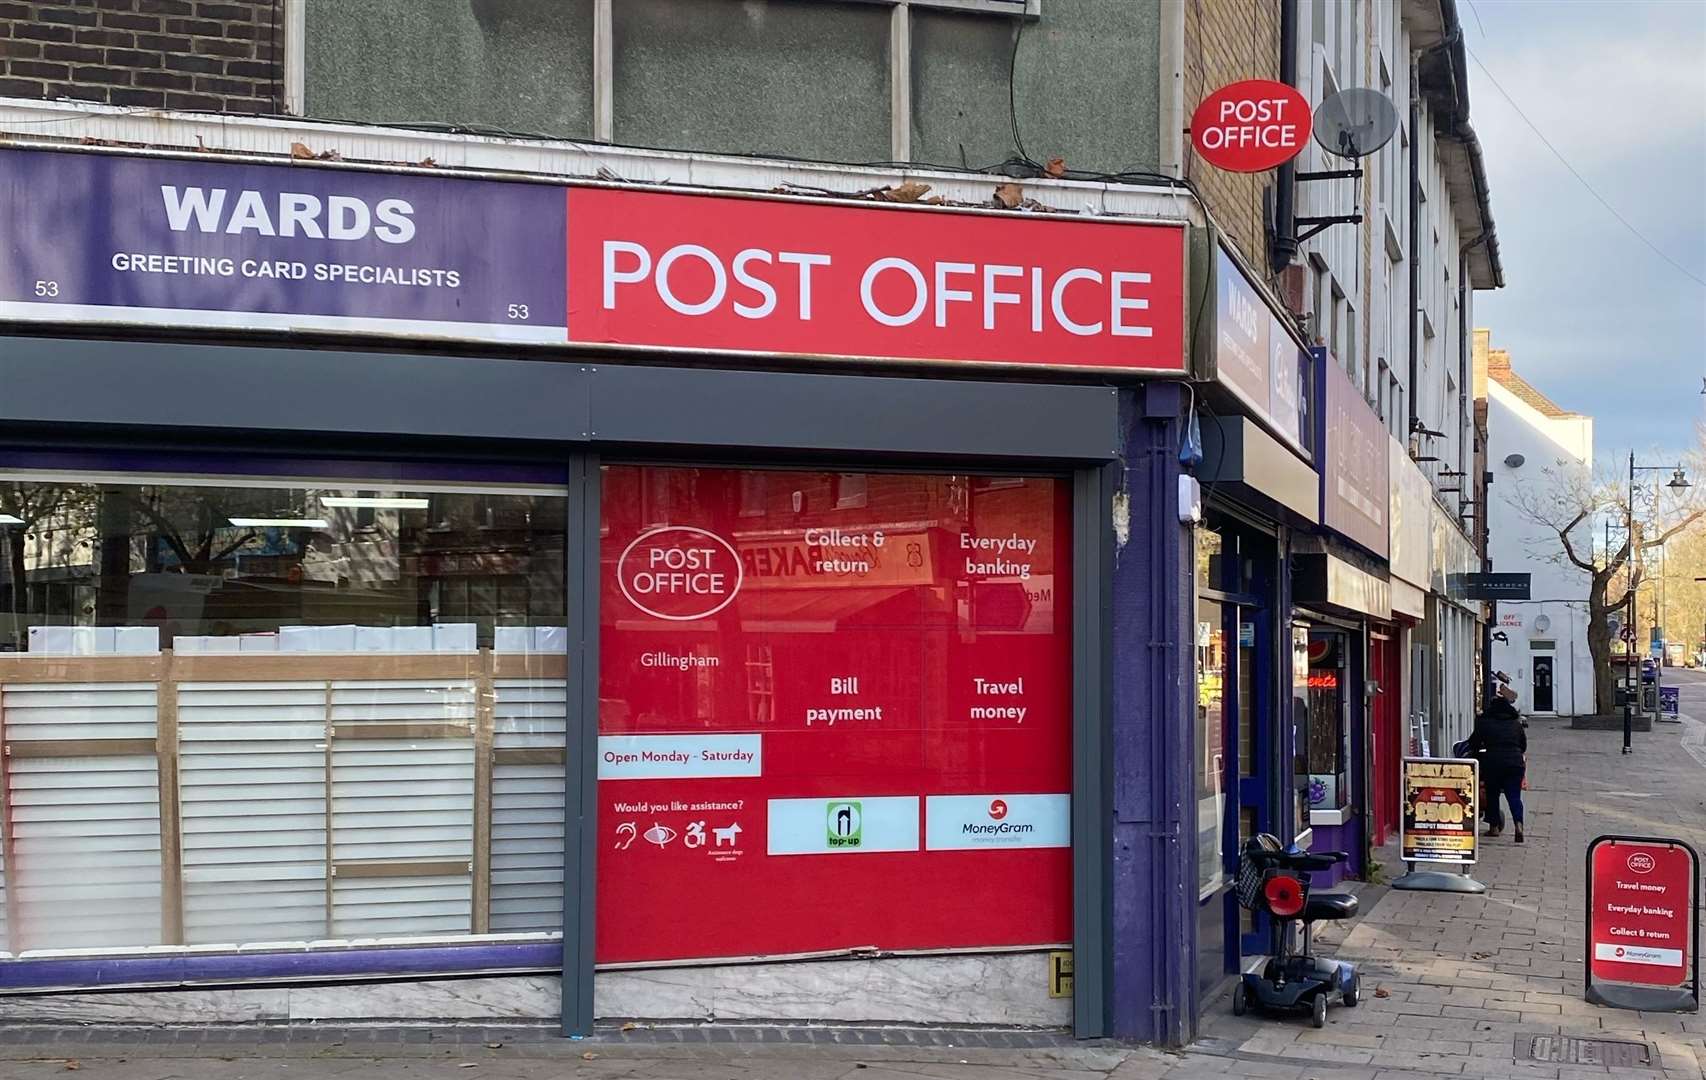 The new Post Office in Gillingham